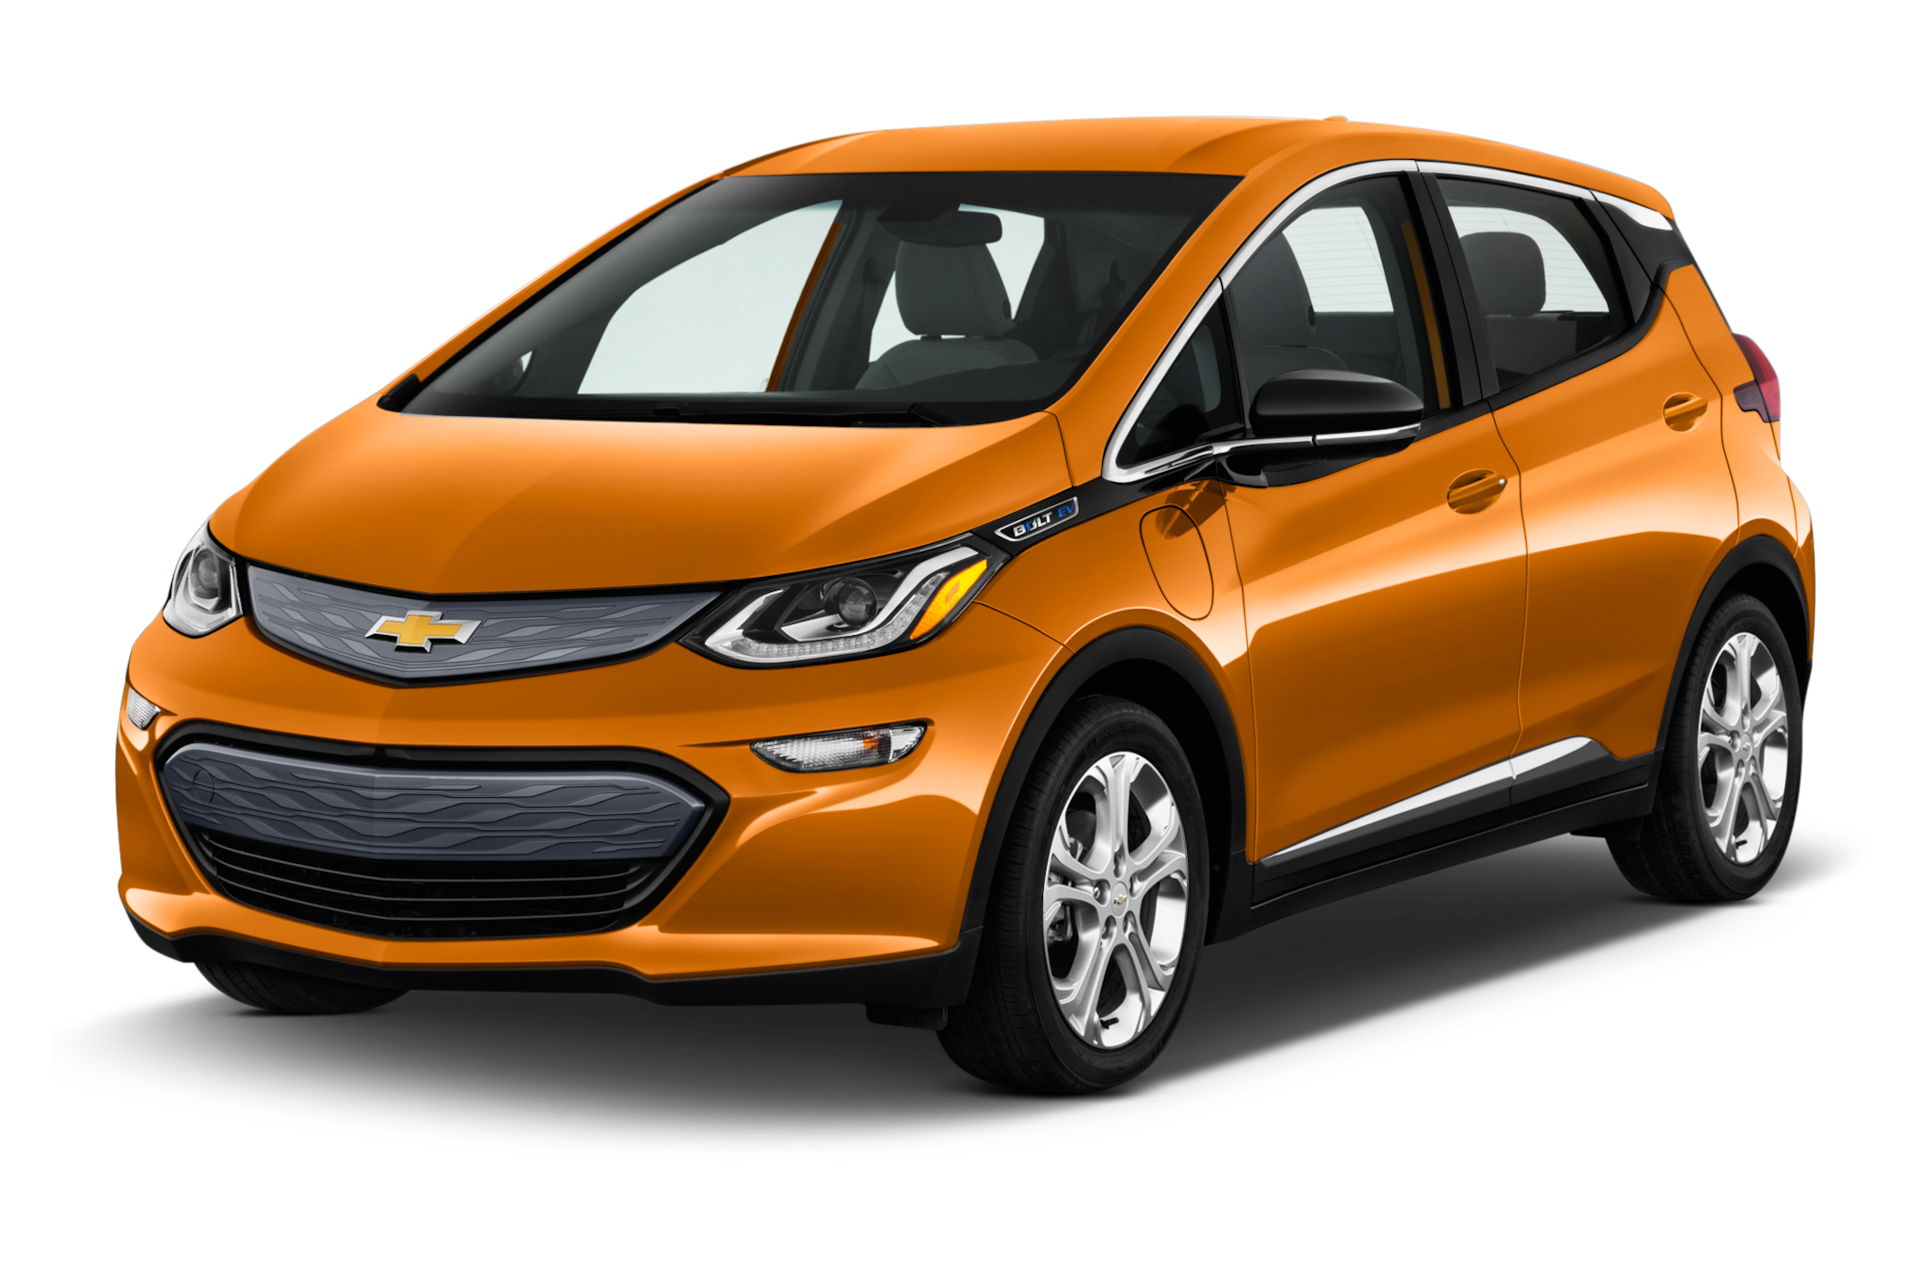 2018 Chevrolet Bolt EV Prices, Reviews, and Photos - MotorTrend